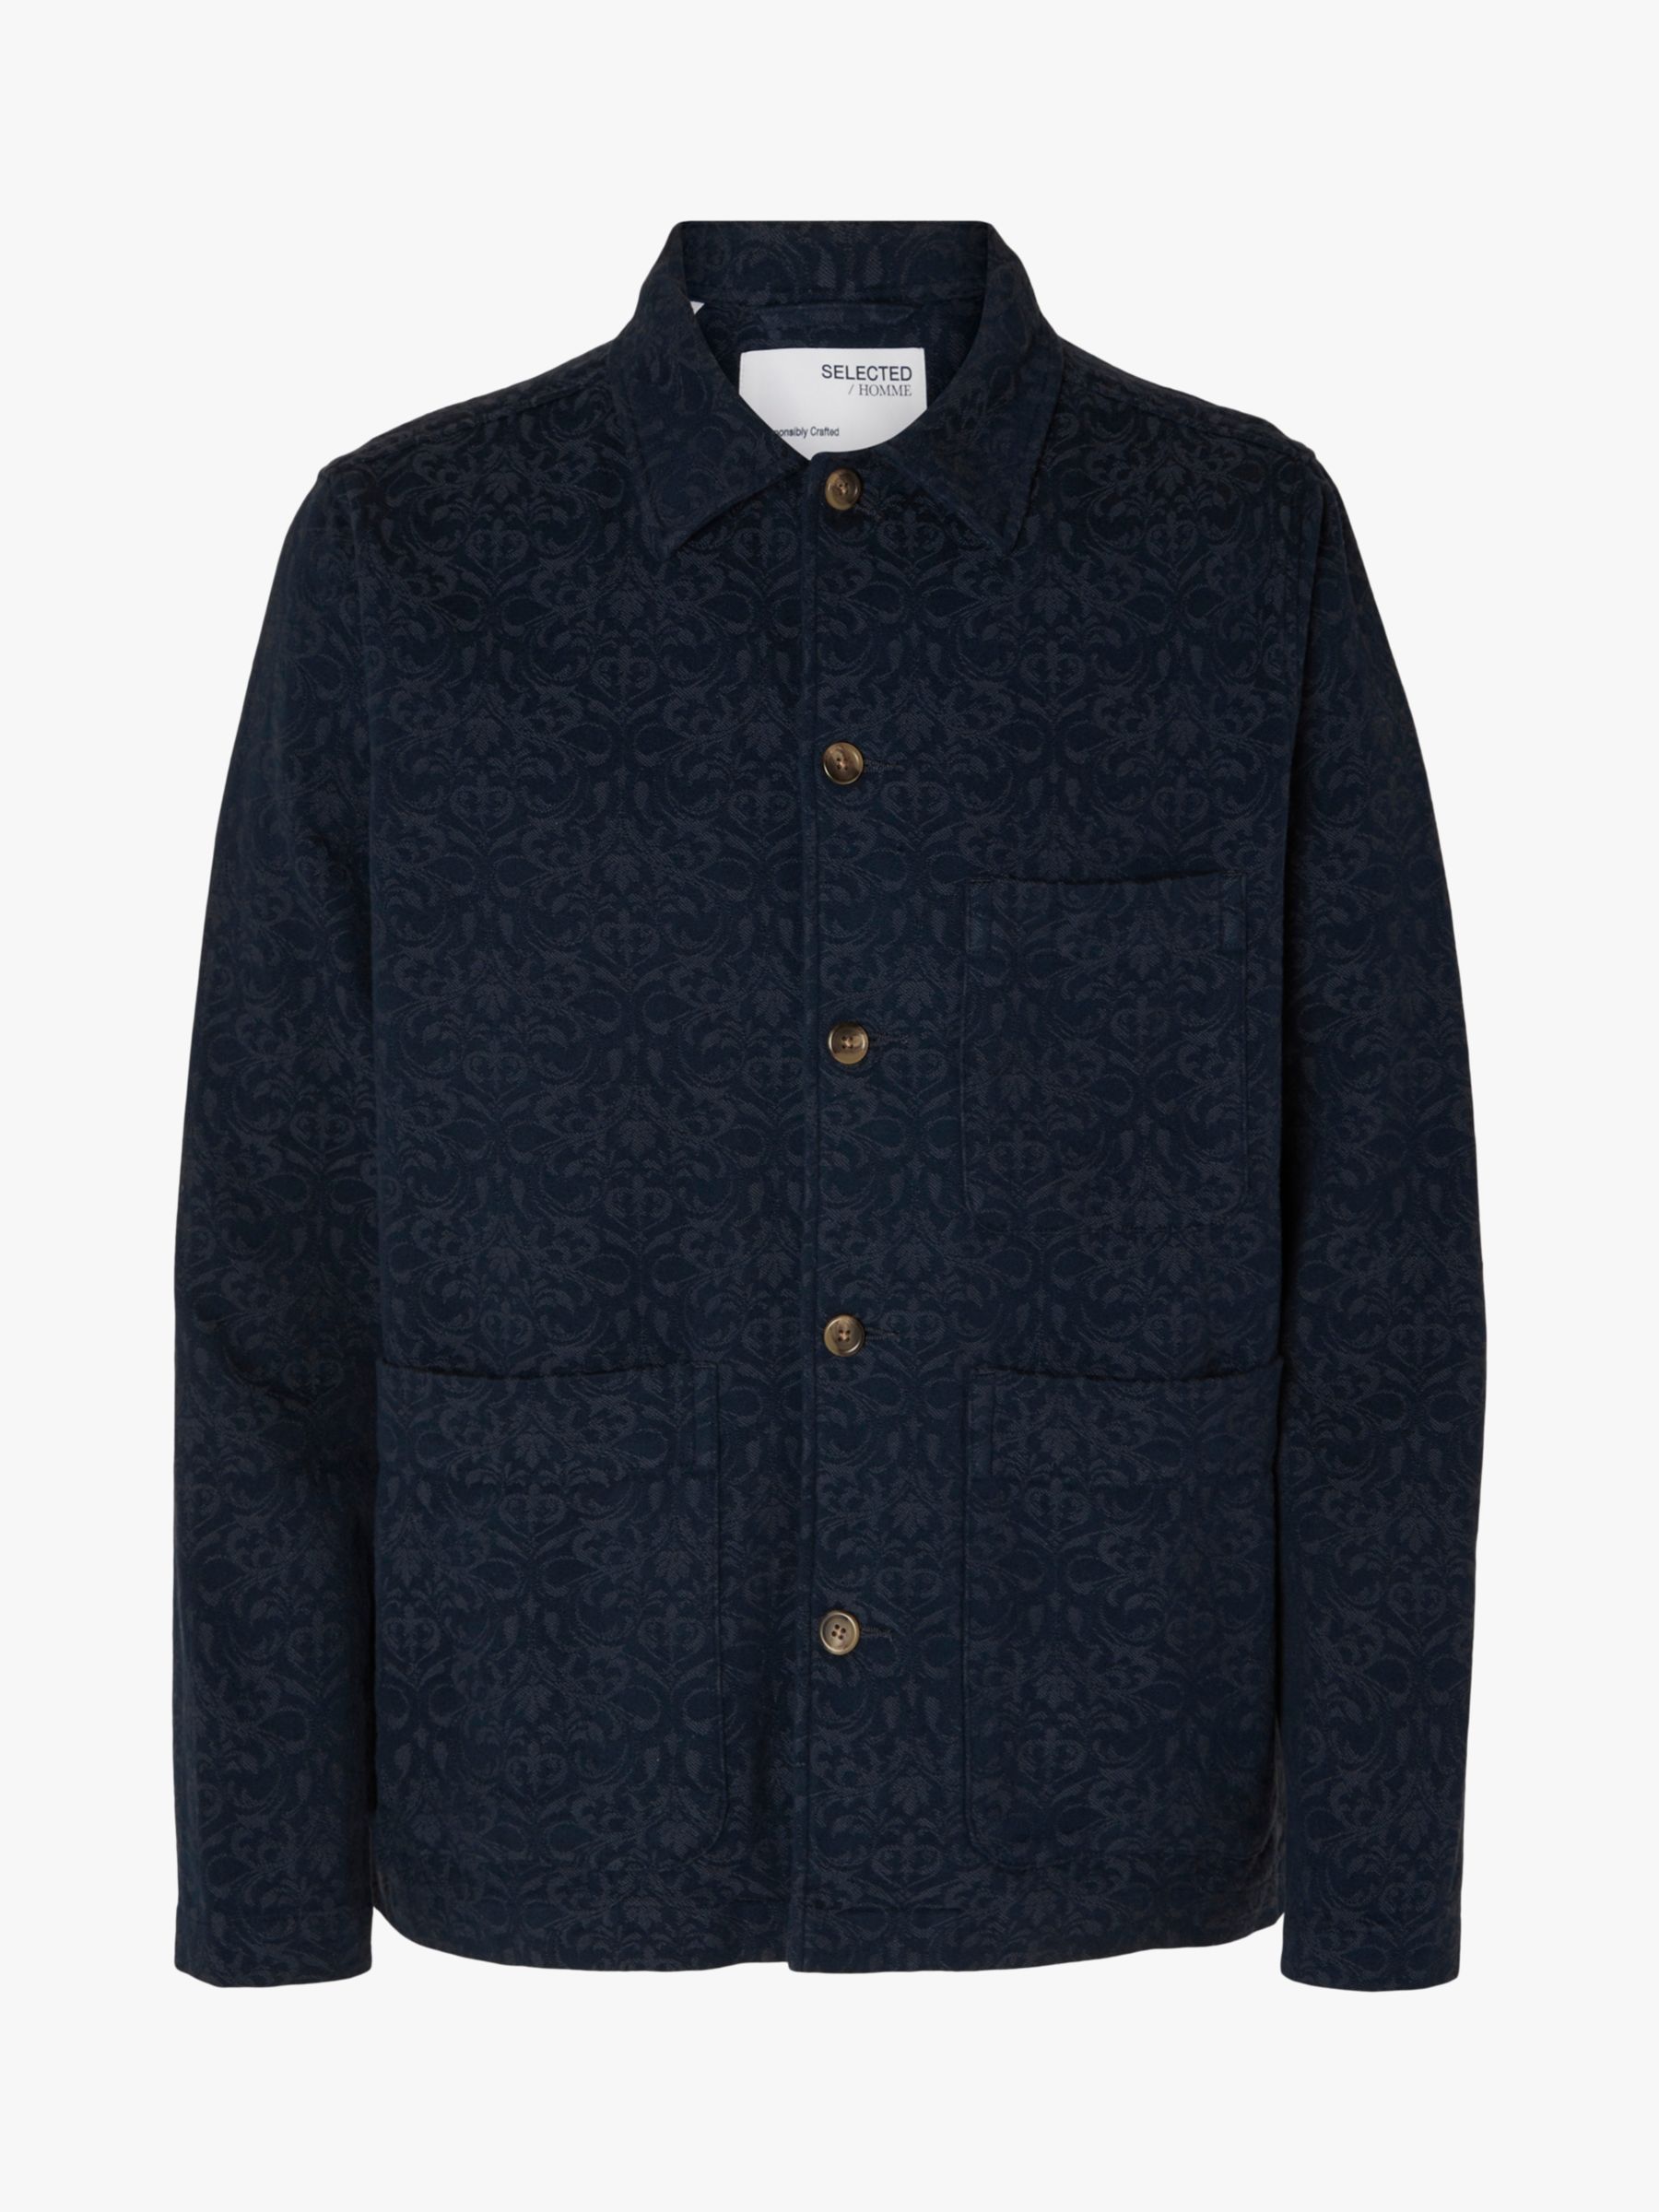 Buy SELECTED HOMME Jason Overshirt, Navy Online at johnlewis.com